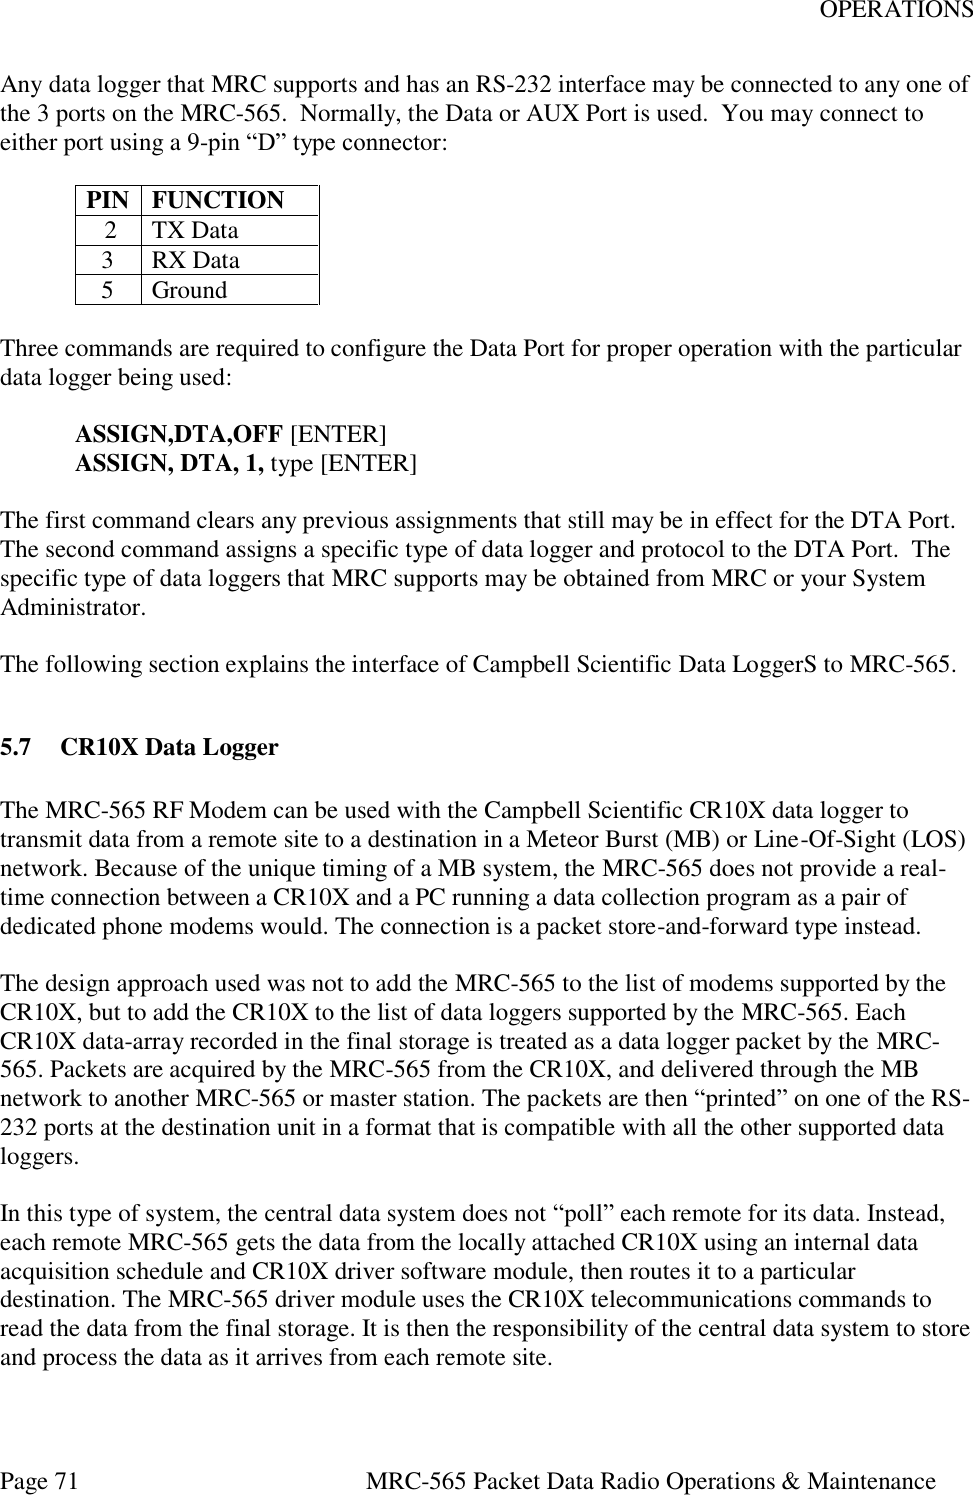 OPERATIONS Page 71  MRC-565 Packet Data Radio Operations &amp; Maintenance Any data logger that MRC supports and has an RS-232 interface may be connected to any one of the 3 ports on the MRC-565.  Normally, the Data or AUX Port is used.  You may connect to either port using a 9-pin “D” type connector:  PIN FUNCTION  2 TX Data 3 RX Data 5 Ground  Three commands are required to configure the Data Port for proper operation with the particular data logger being used:   ASSIGN,DTA,OFF [ENTER]  ASSIGN, DTA, 1, type [ENTER]  The first command clears any previous assignments that still may be in effect for the DTA Port.  The second command assigns a specific type of data logger and protocol to the DTA Port.  The specific type of data loggers that MRC supports may be obtained from MRC or your System Administrator.  The following section explains the interface of Campbell Scientific Data LoggerS to MRC-565.  5.7 CR10X Data Logger  The MRC-565 RF Modem can be used with the Campbell Scientific CR10X data logger to transmit data from a remote site to a destination in a Meteor Burst (MB) or Line-Of-Sight (LOS) network. Because of the unique timing of a MB system, the MRC-565 does not provide a real-time connection between a CR10X and a PC running a data collection program as a pair of dedicated phone modems would. The connection is a packet store-and-forward type instead.   The design approach used was not to add the MRC-565 to the list of modems supported by the CR10X, but to add the CR10X to the list of data loggers supported by the MRC-565. Each CR10X data-array recorded in the final storage is treated as a data logger packet by the MRC-565. Packets are acquired by the MRC-565 from the CR10X, and delivered through the MB network to another MRC-565 or master station. The packets are then “printed” on one of the RS-232 ports at the destination unit in a format that is compatible with all the other supported data loggers.  In this type of system, the central data system does not “poll” each remote for its data. Instead, each remote MRC-565 gets the data from the locally attached CR10X using an internal data acquisition schedule and CR10X driver software module, then routes it to a particular destination. The MRC-565 driver module uses the CR10X telecommunications commands to read the data from the final storage. It is then the responsibility of the central data system to store and process the data as it arrives from each remote site.   